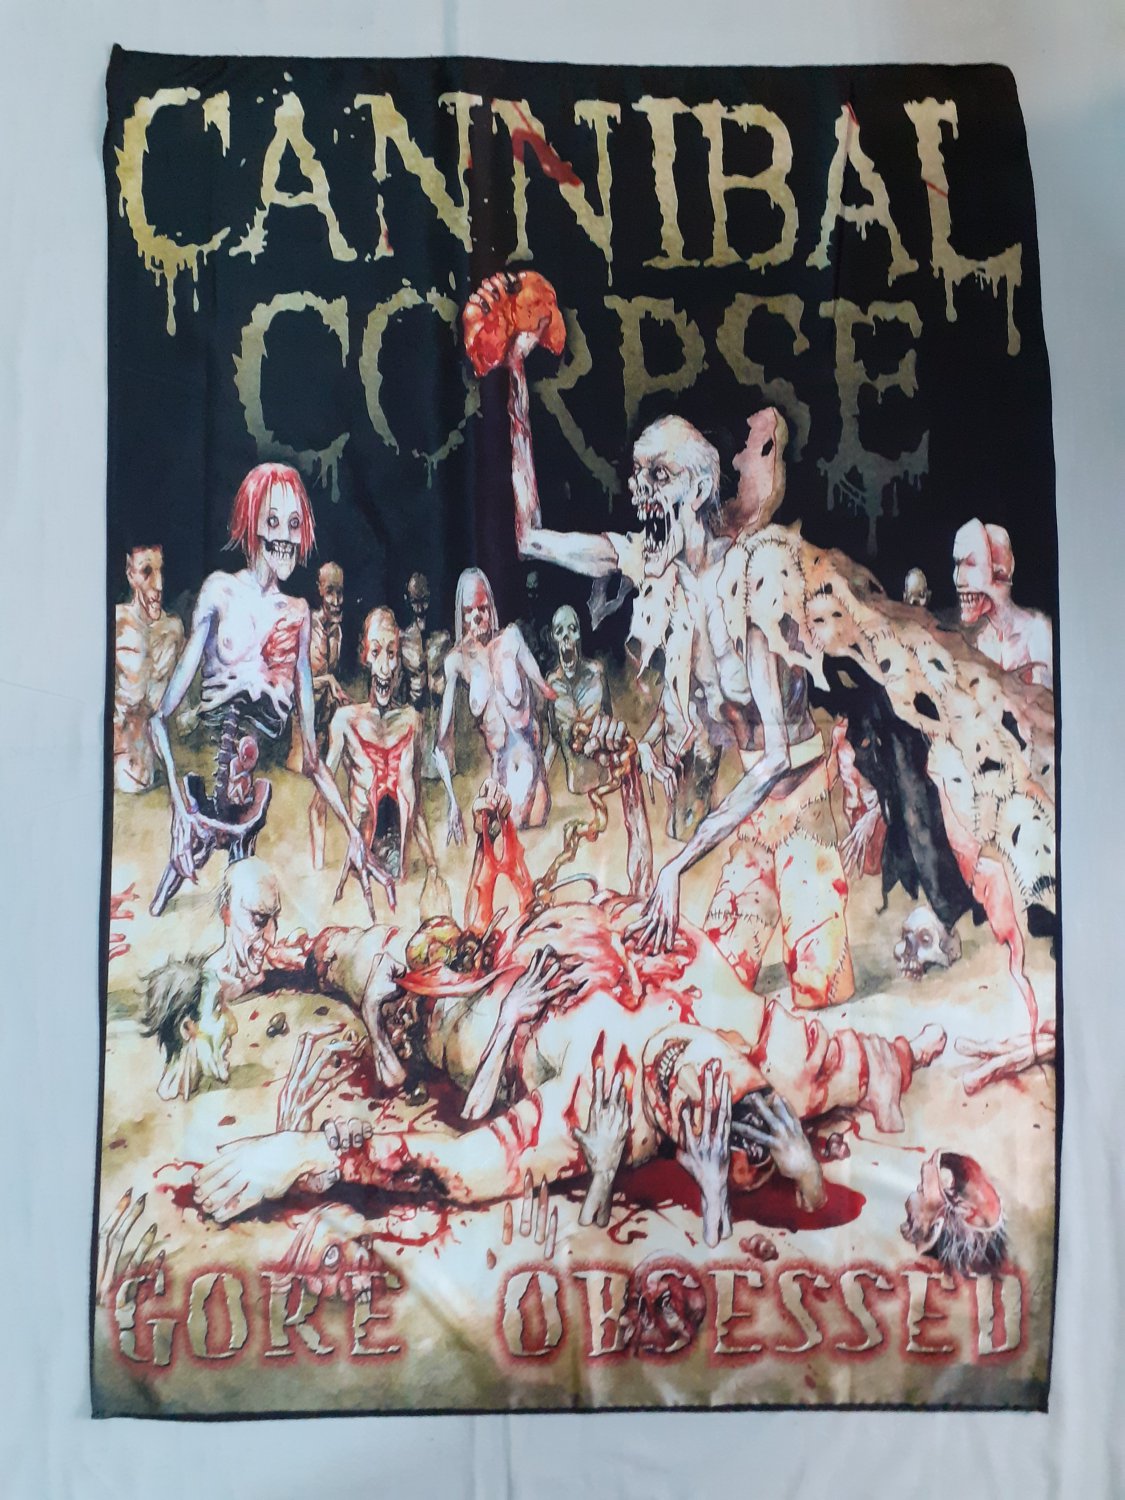 CANNIBAL CORPSE - Gore obsessed FLAG Heavy death metal cloth poster